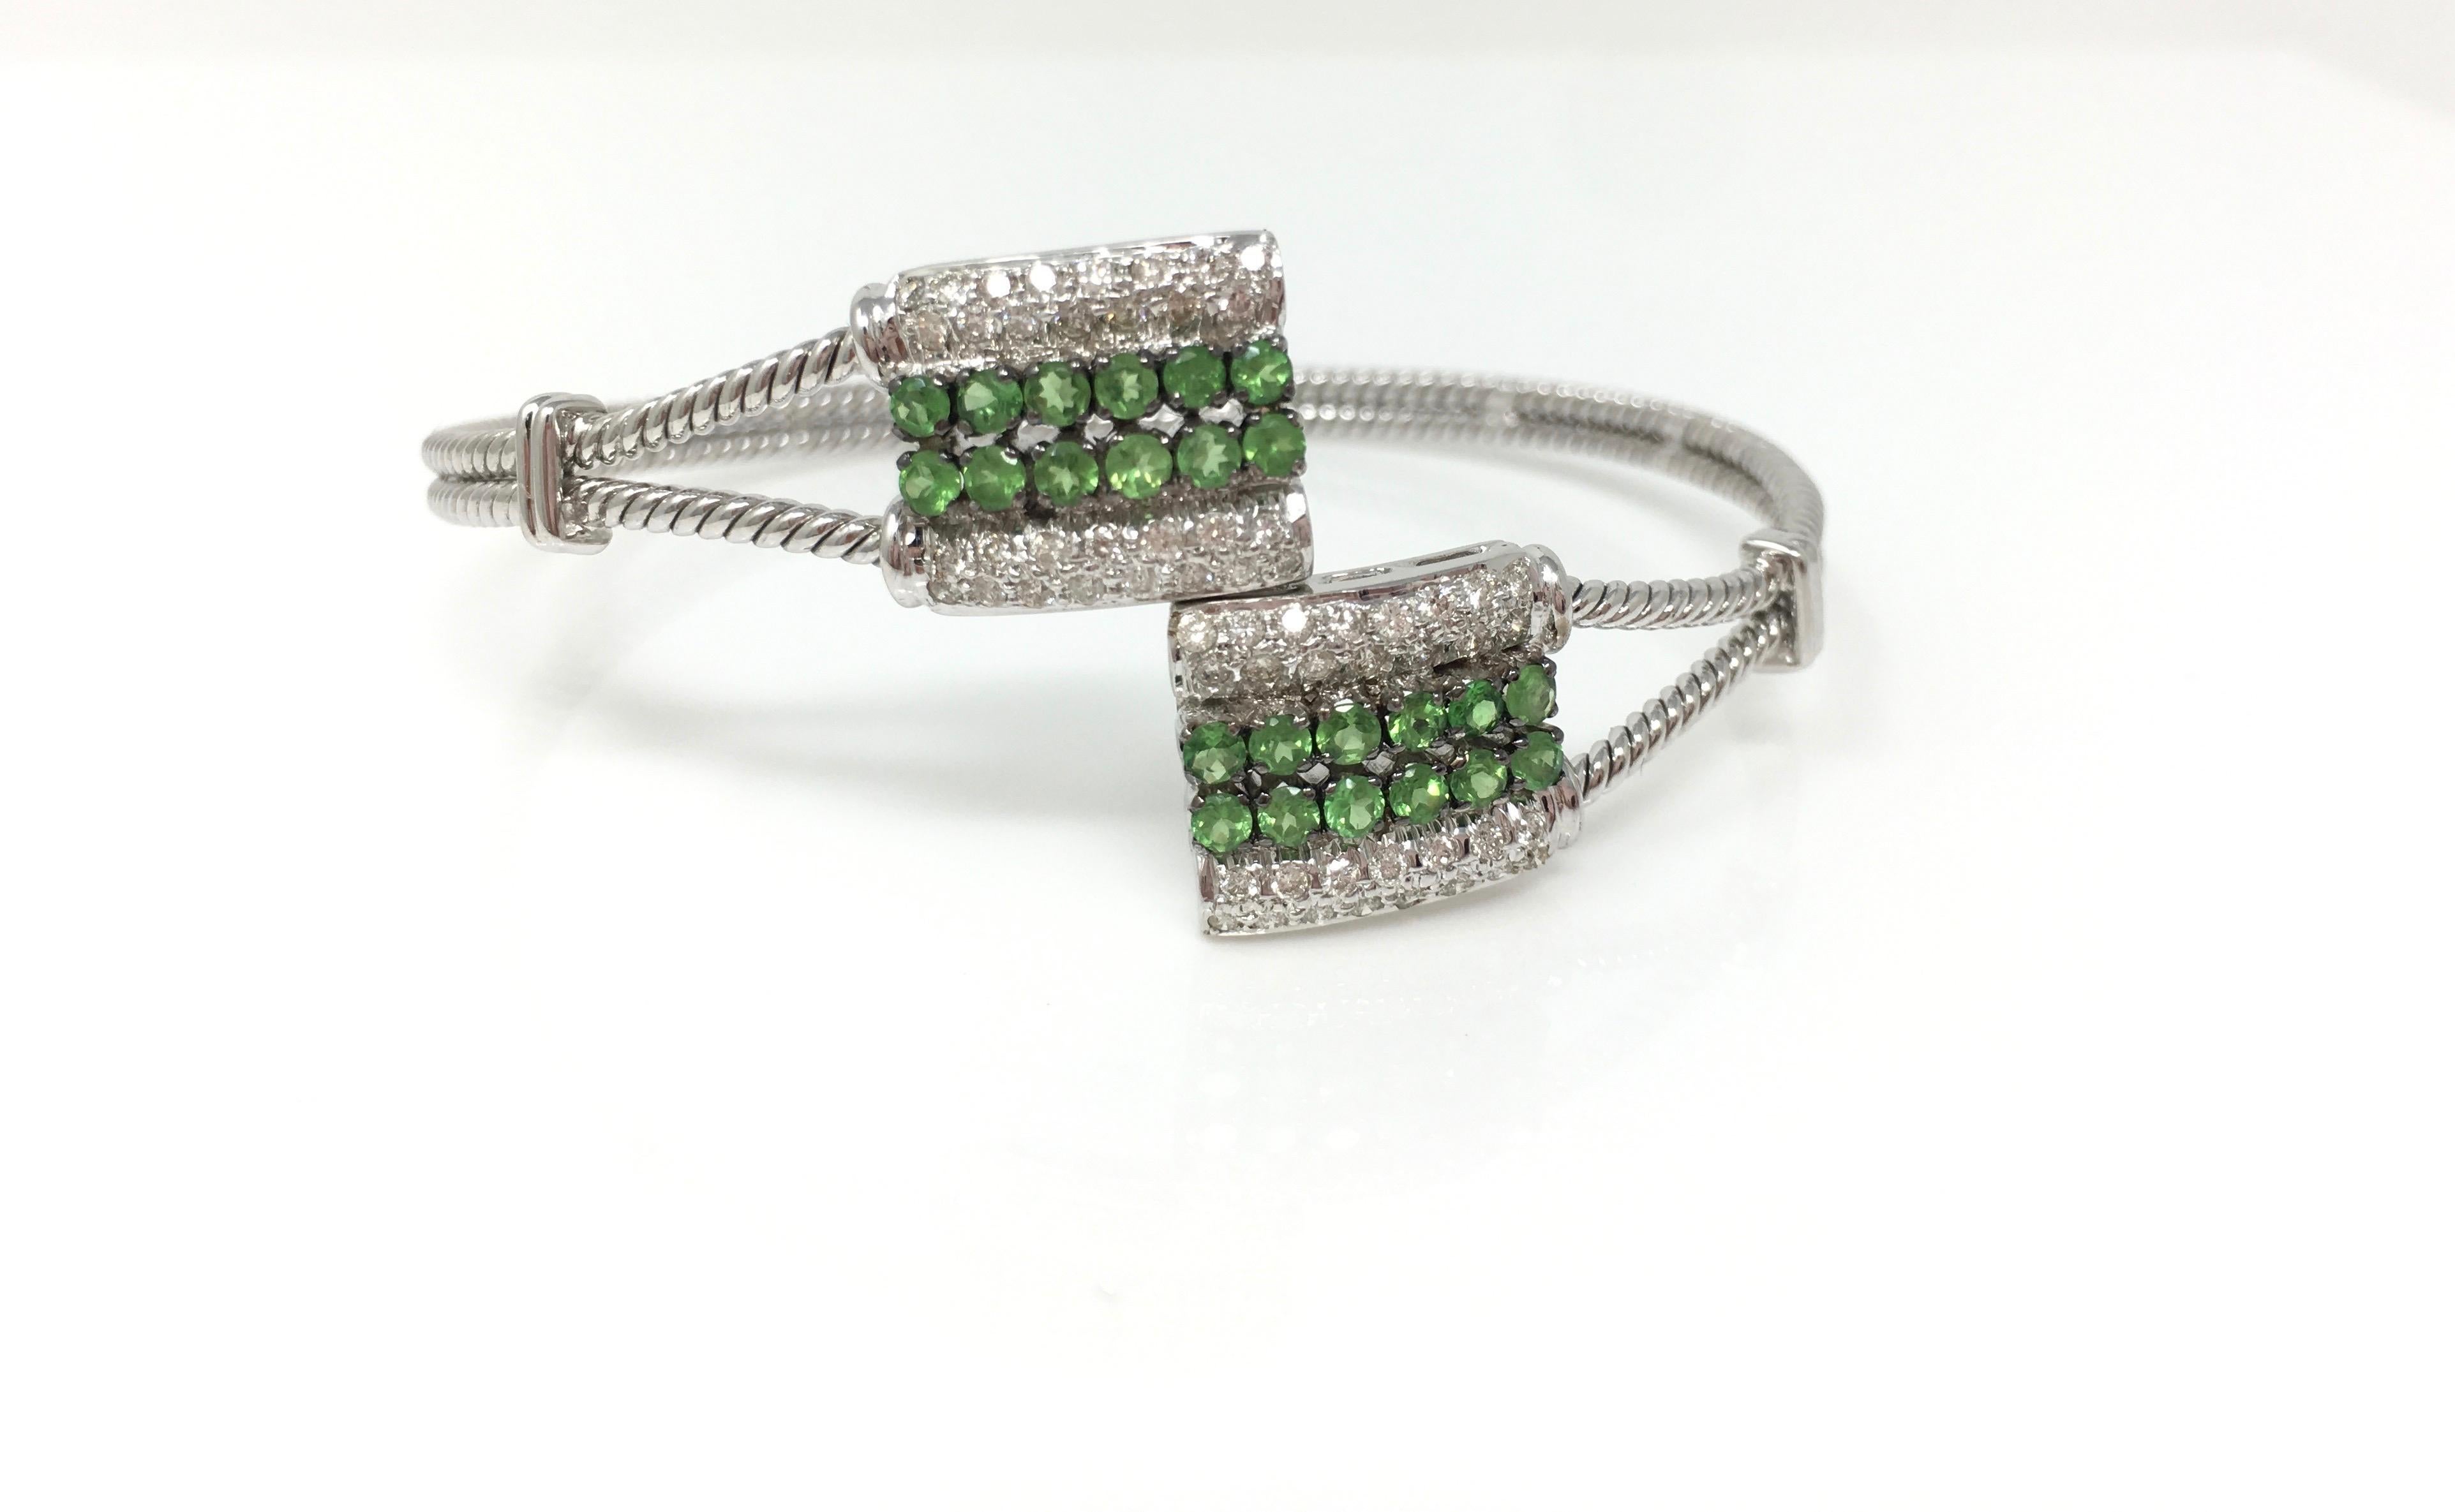 Very fashionable and chic perfect for everyday wear. An 18k white gold crossover flexible bangle bracelet with pave set white round brilliant diamond weighing 0.61 carat with VS clarity GH color and round brilliant tsavorite weighing 1.17 carat.